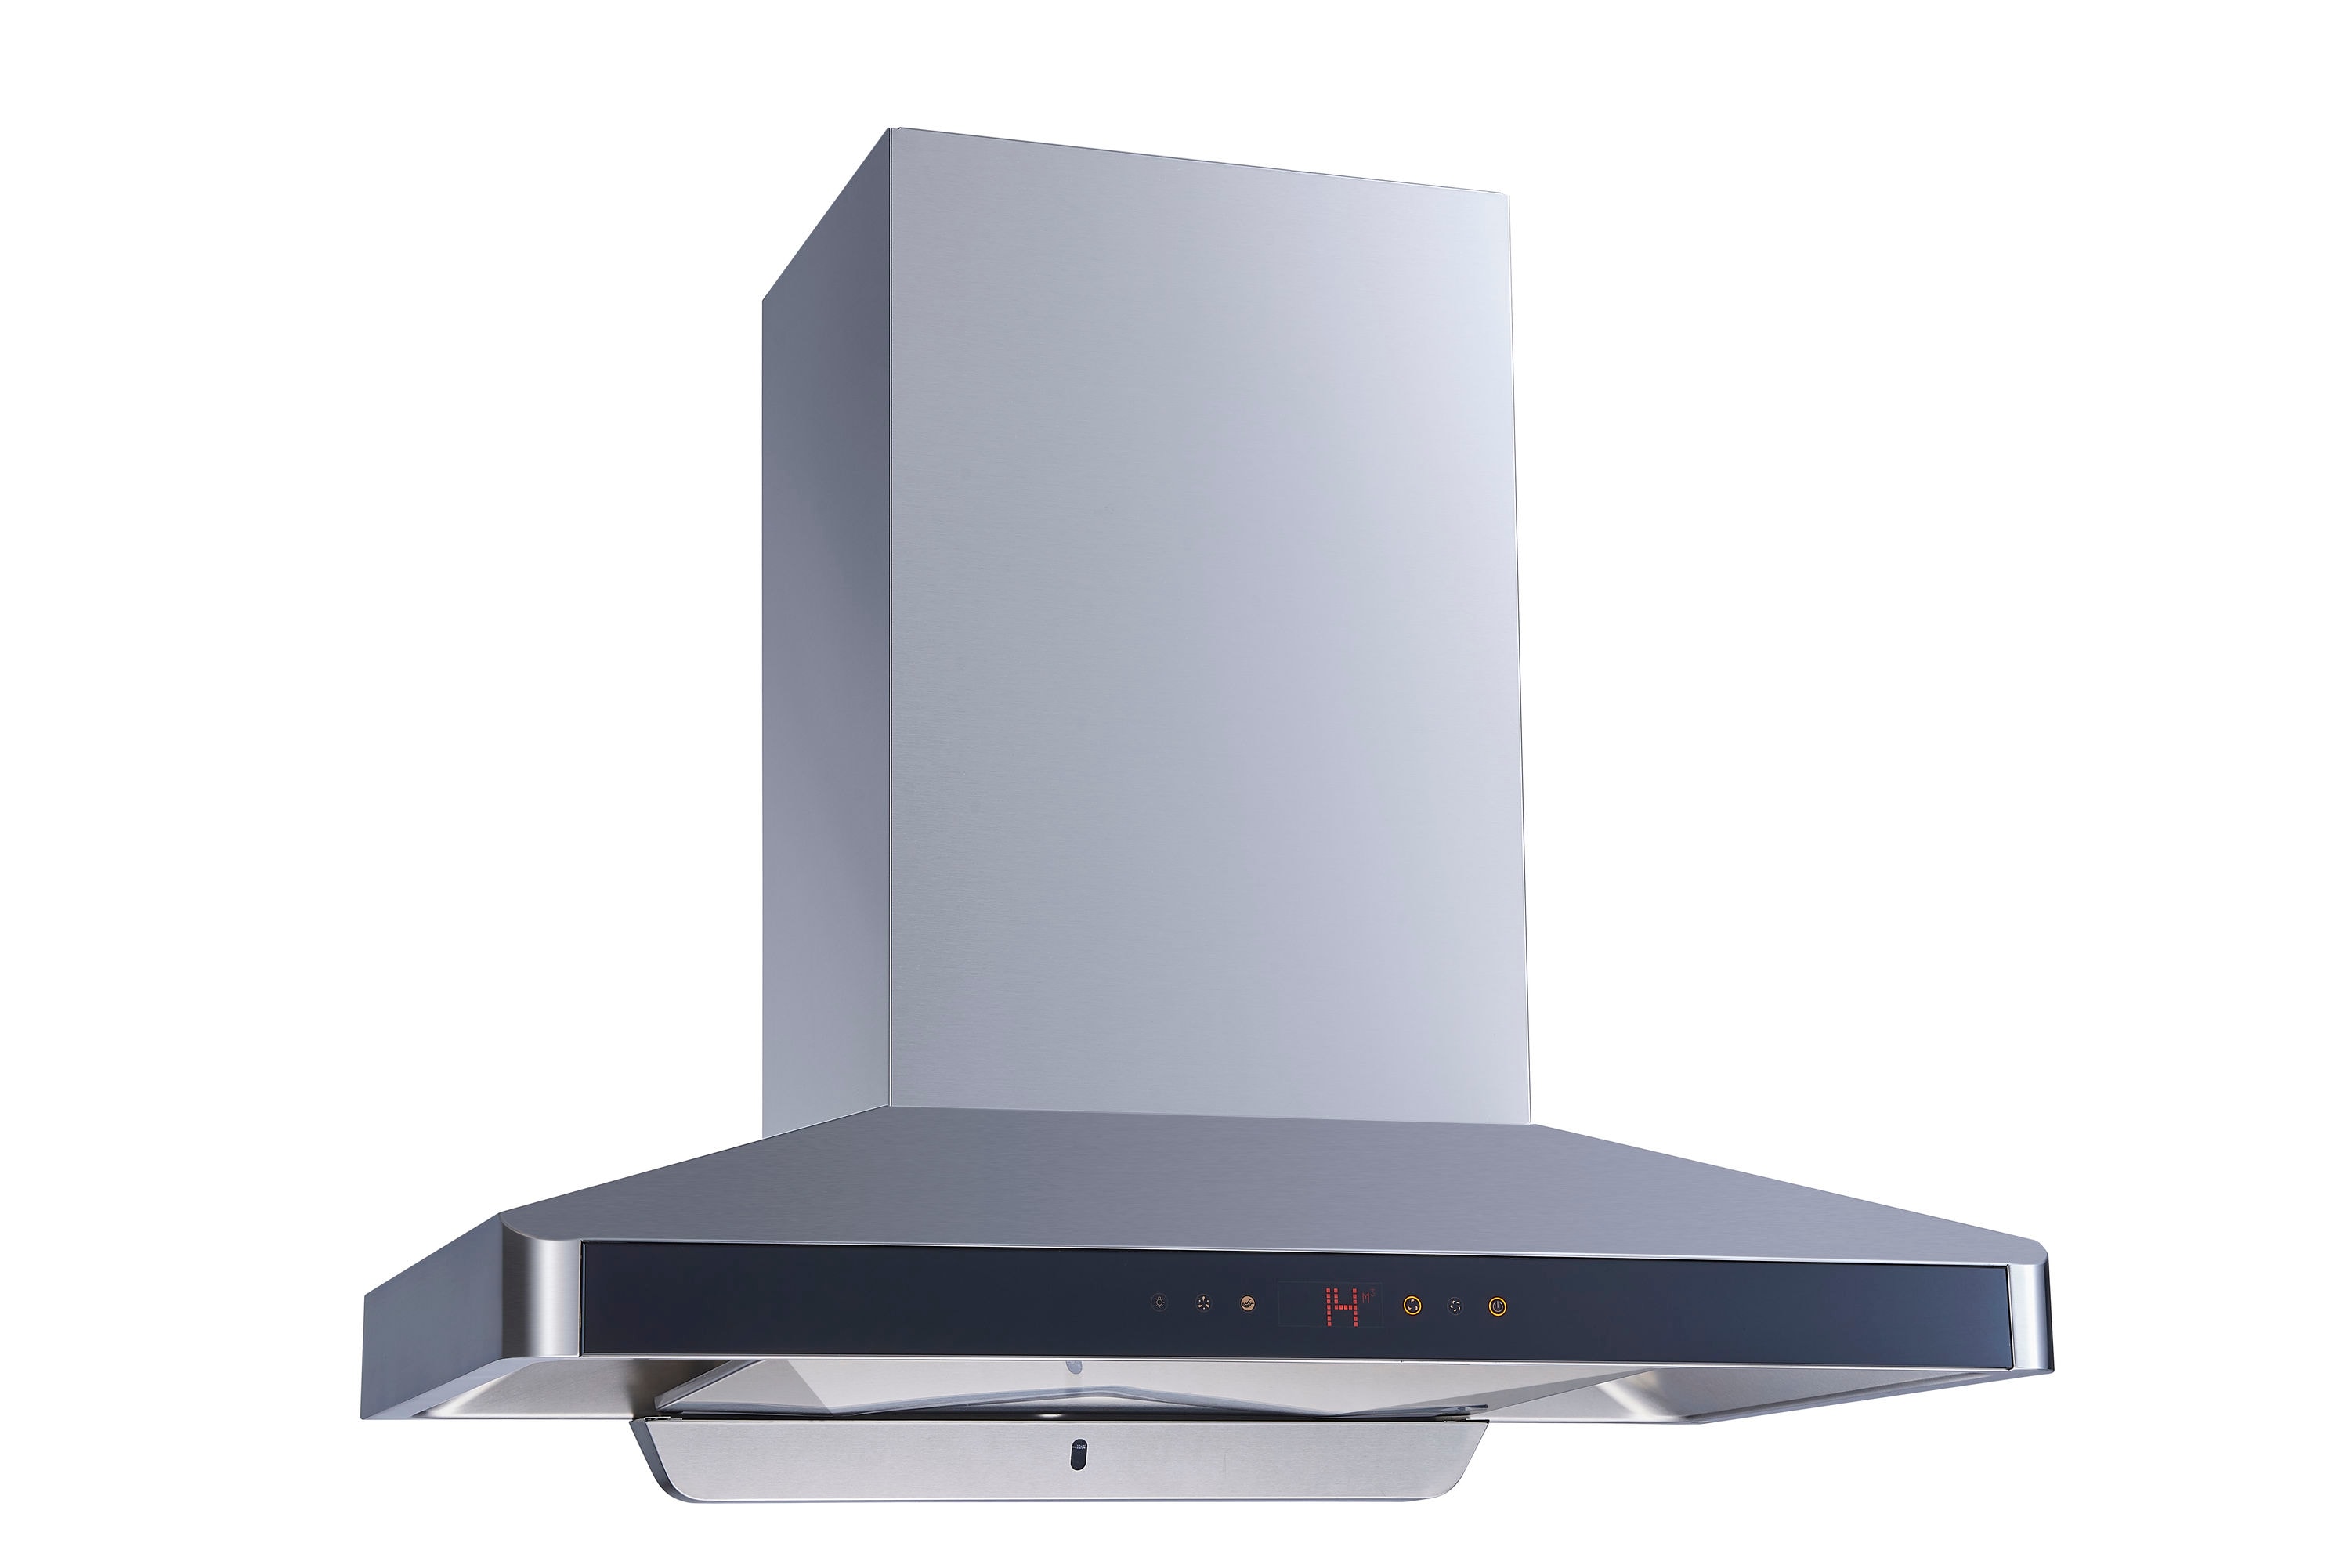 iKTCH 36-in 900-CFM Ducted Stainless Steel Wall-Mounted Range Hood